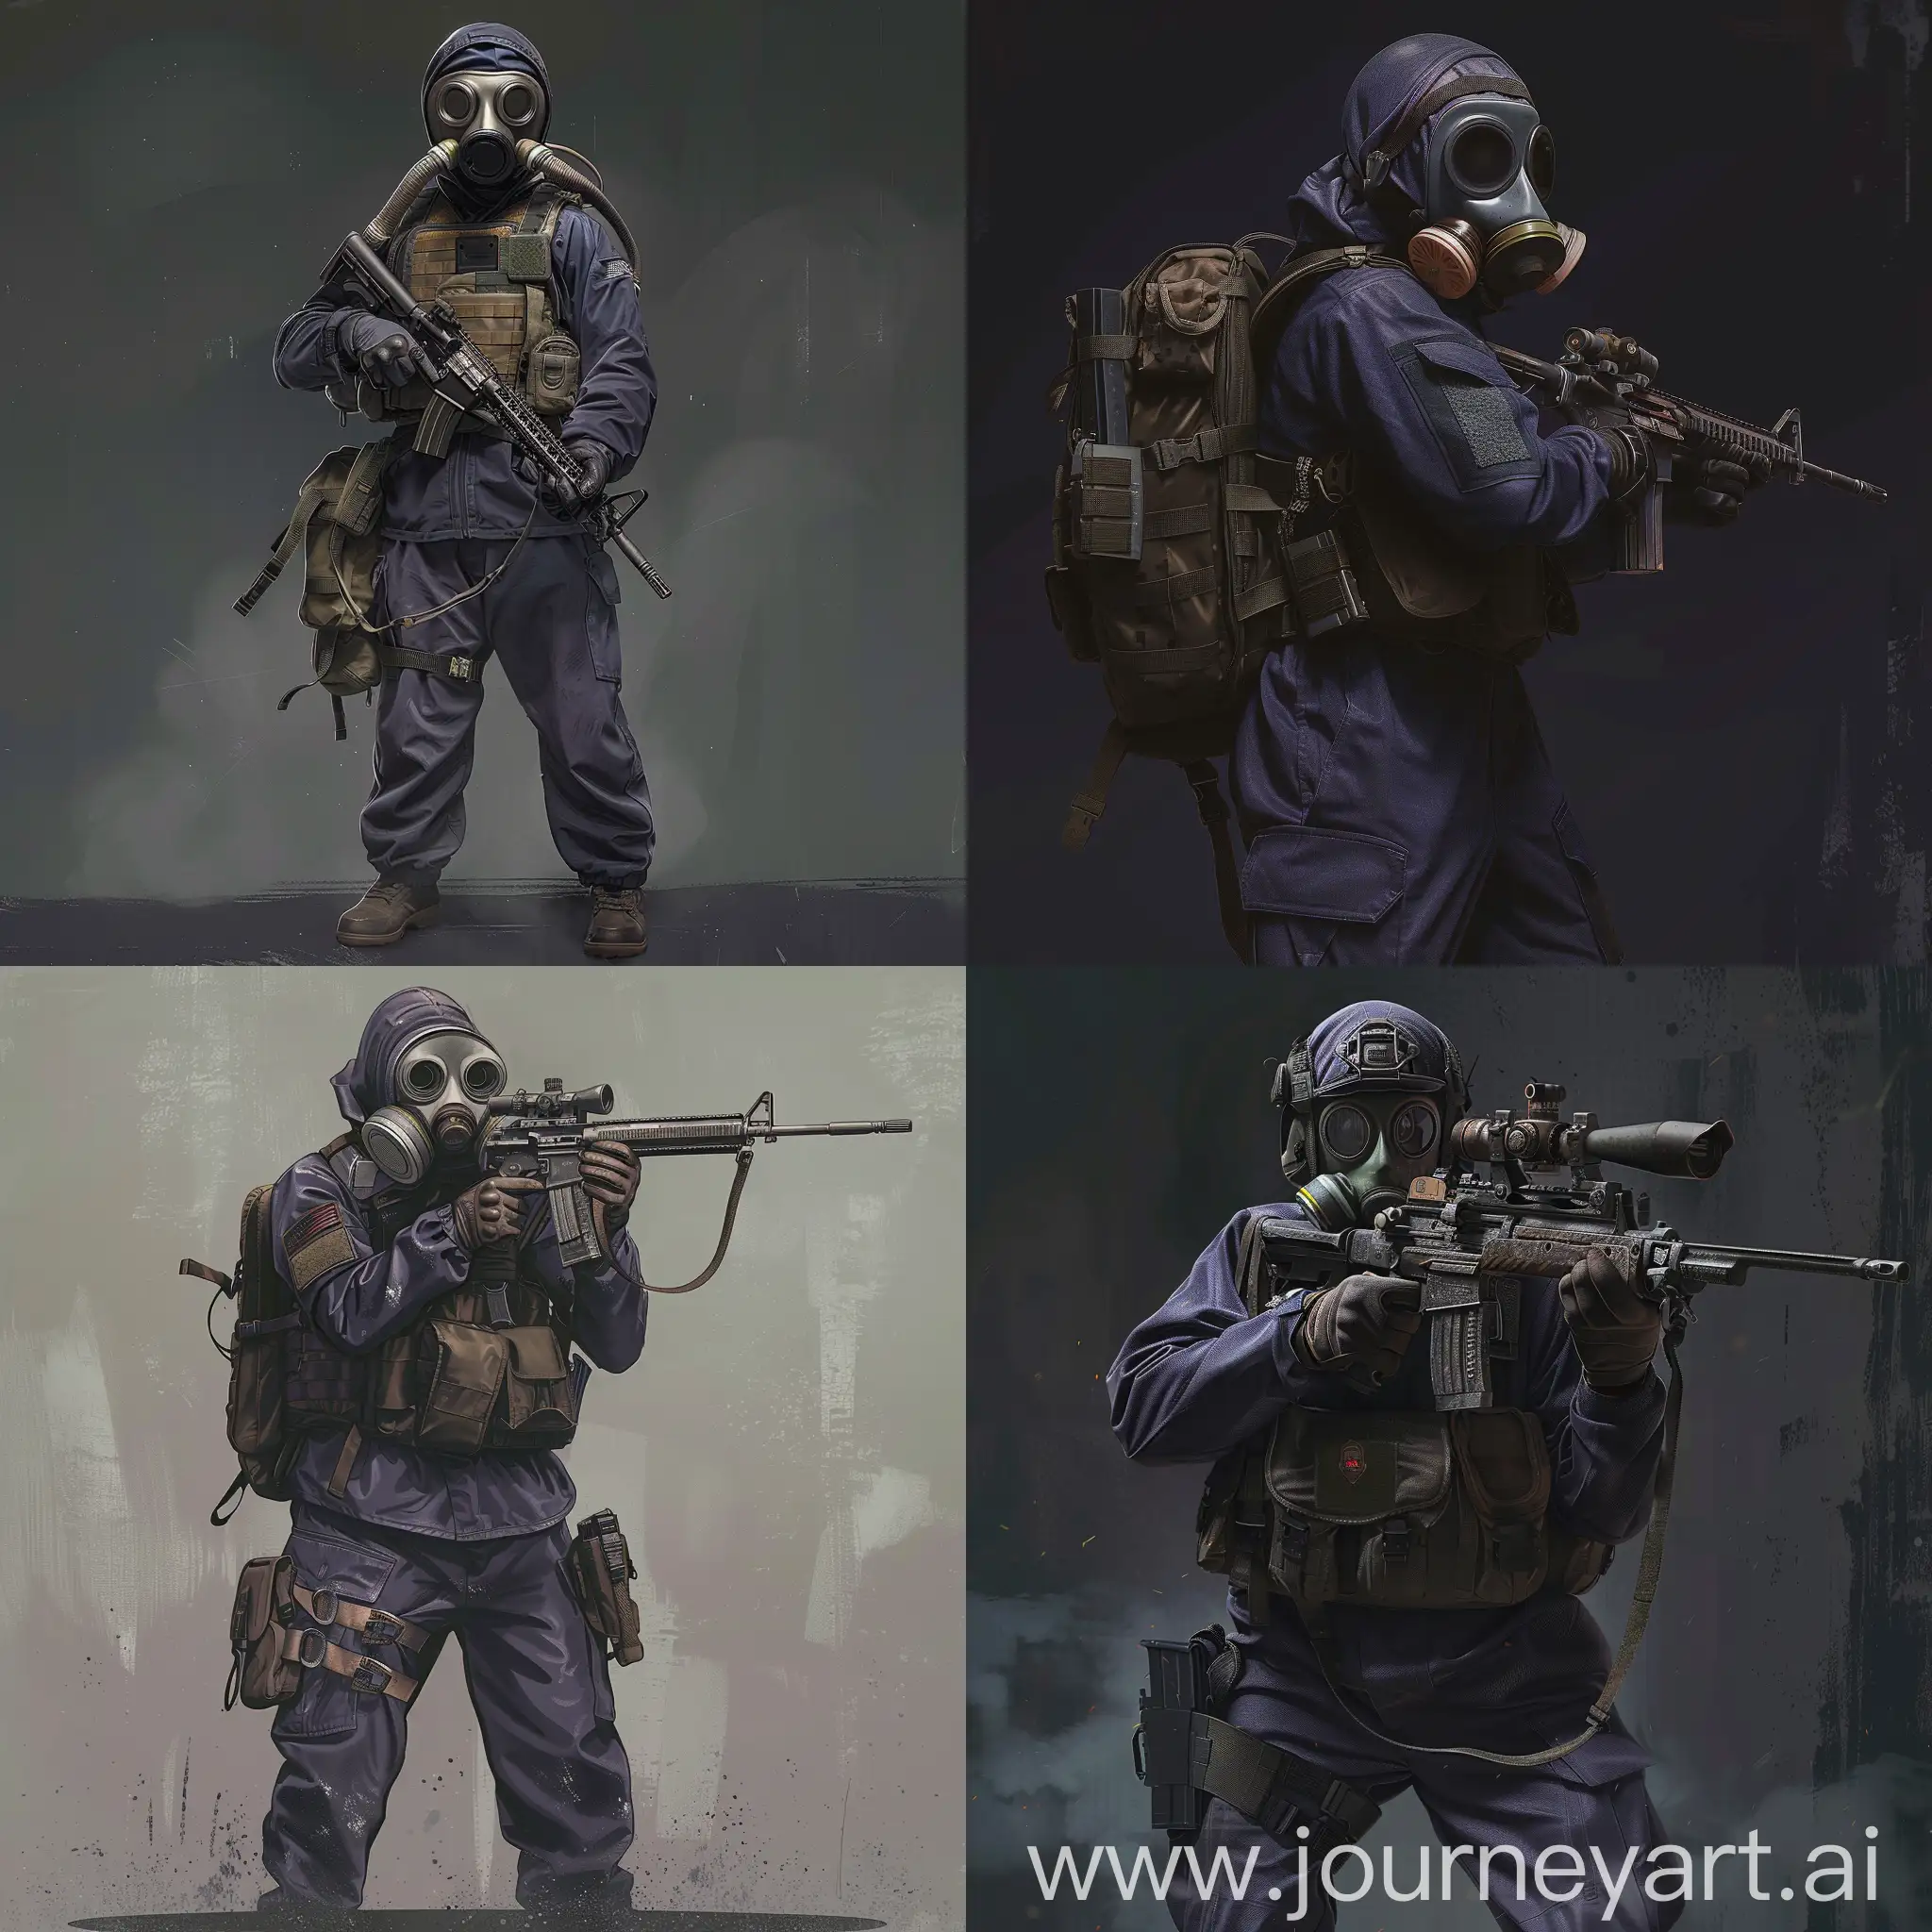 Stealthy-Sniper-in-Dark-Purple-Military-Jumpsuit-with-Gas-Mask